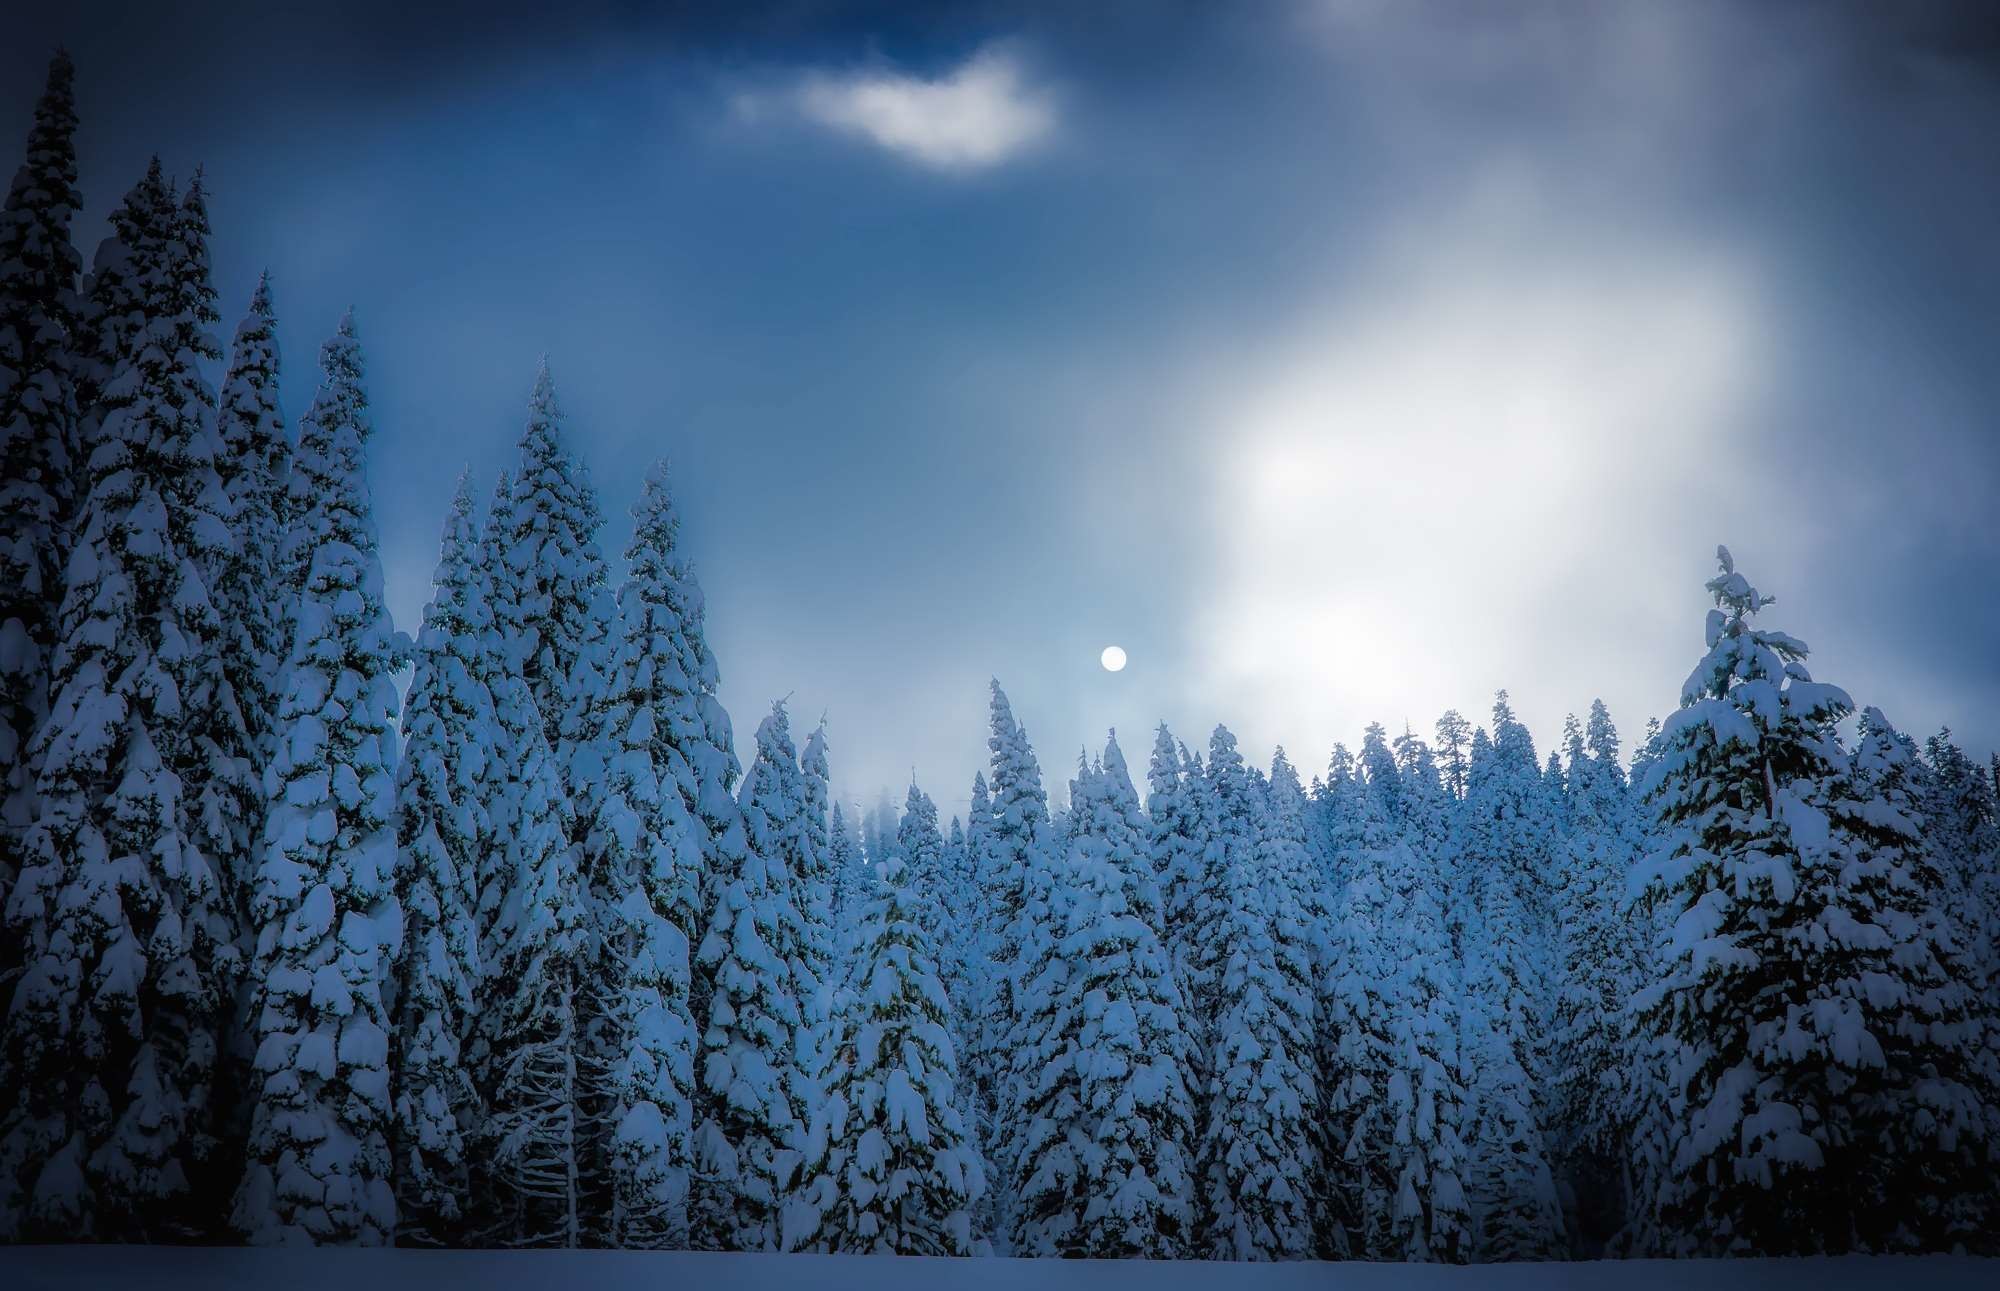 2000x1291 ... dusk, forest, hdr, landscape, moon, nature, outdoors, rural, sky, snow,  squaw valley, sunset, trees, wilderness, winter, woods wallpaper and  background